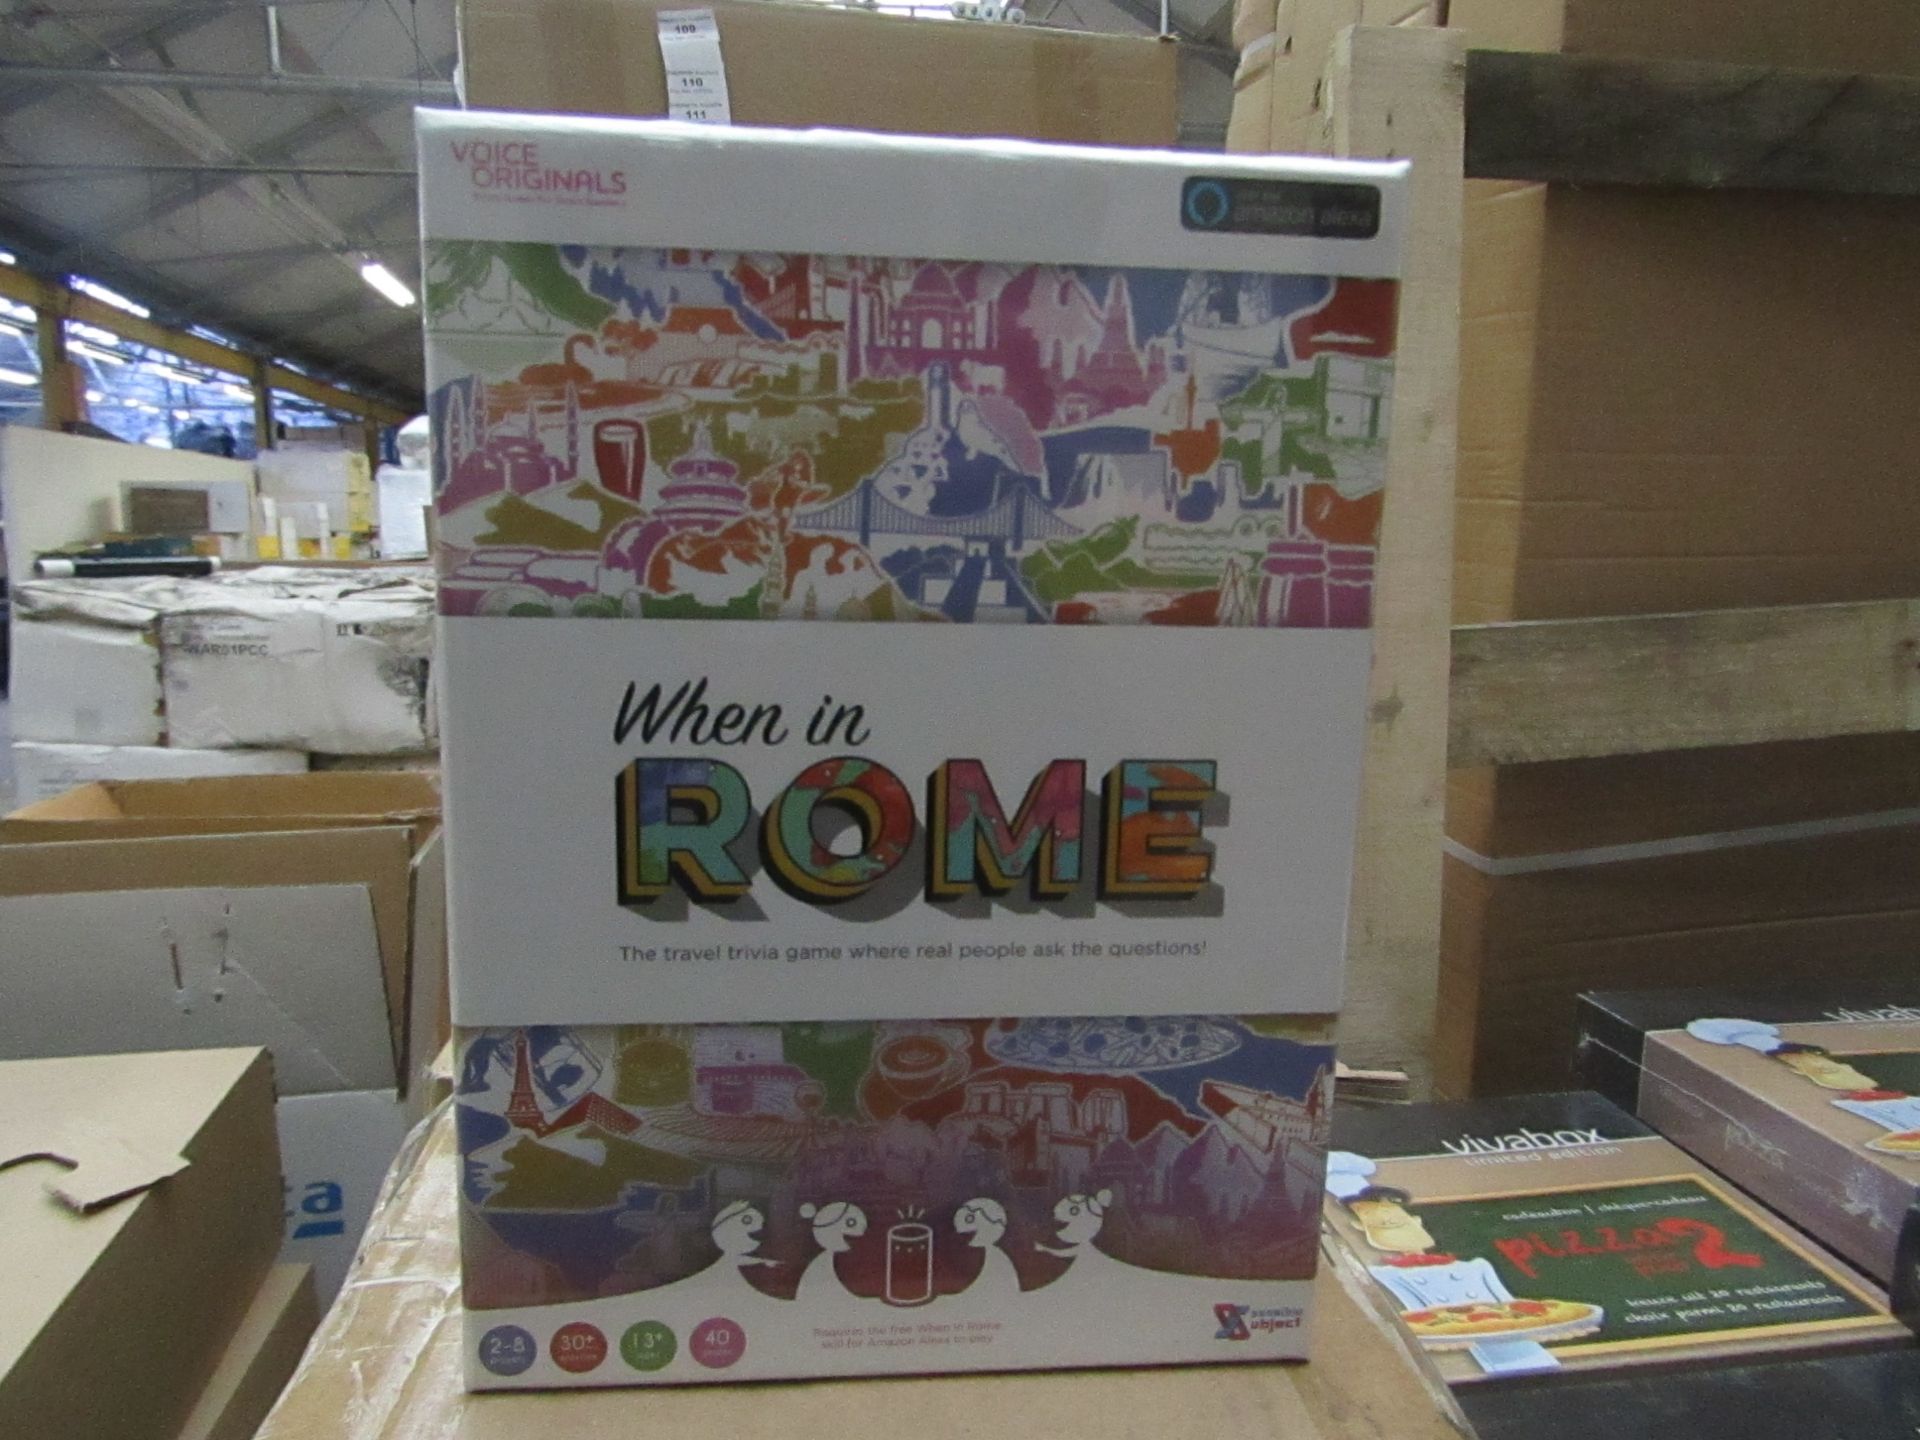 10x Voice Originals - 'When In Rome' Travel Trivia Question Game - All Unused & Boxed.